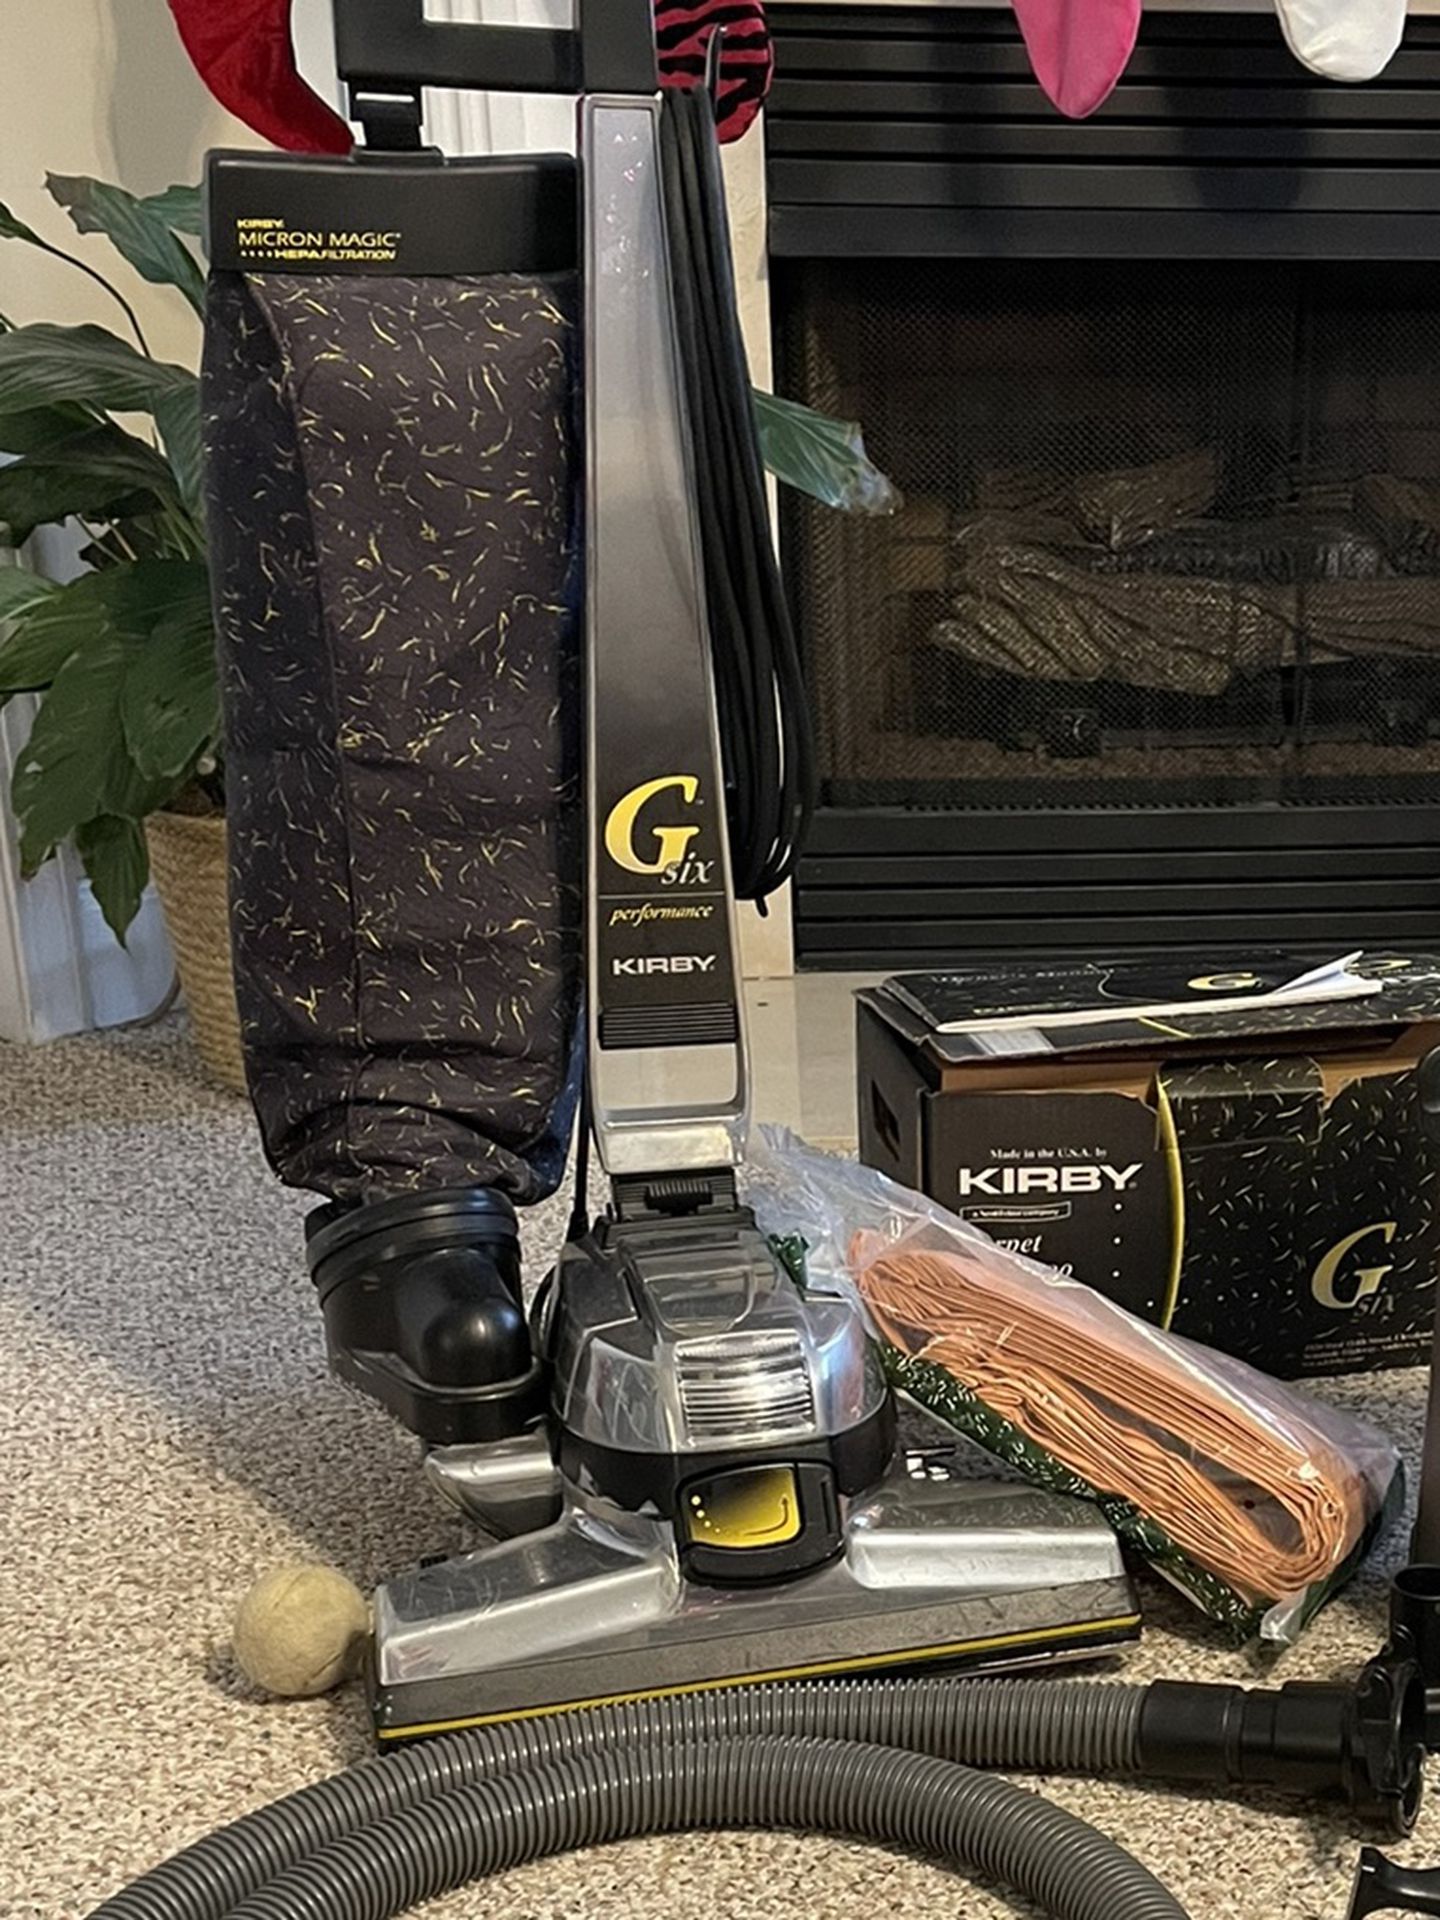 G Six Performance Kirby Vacuum And Accessories